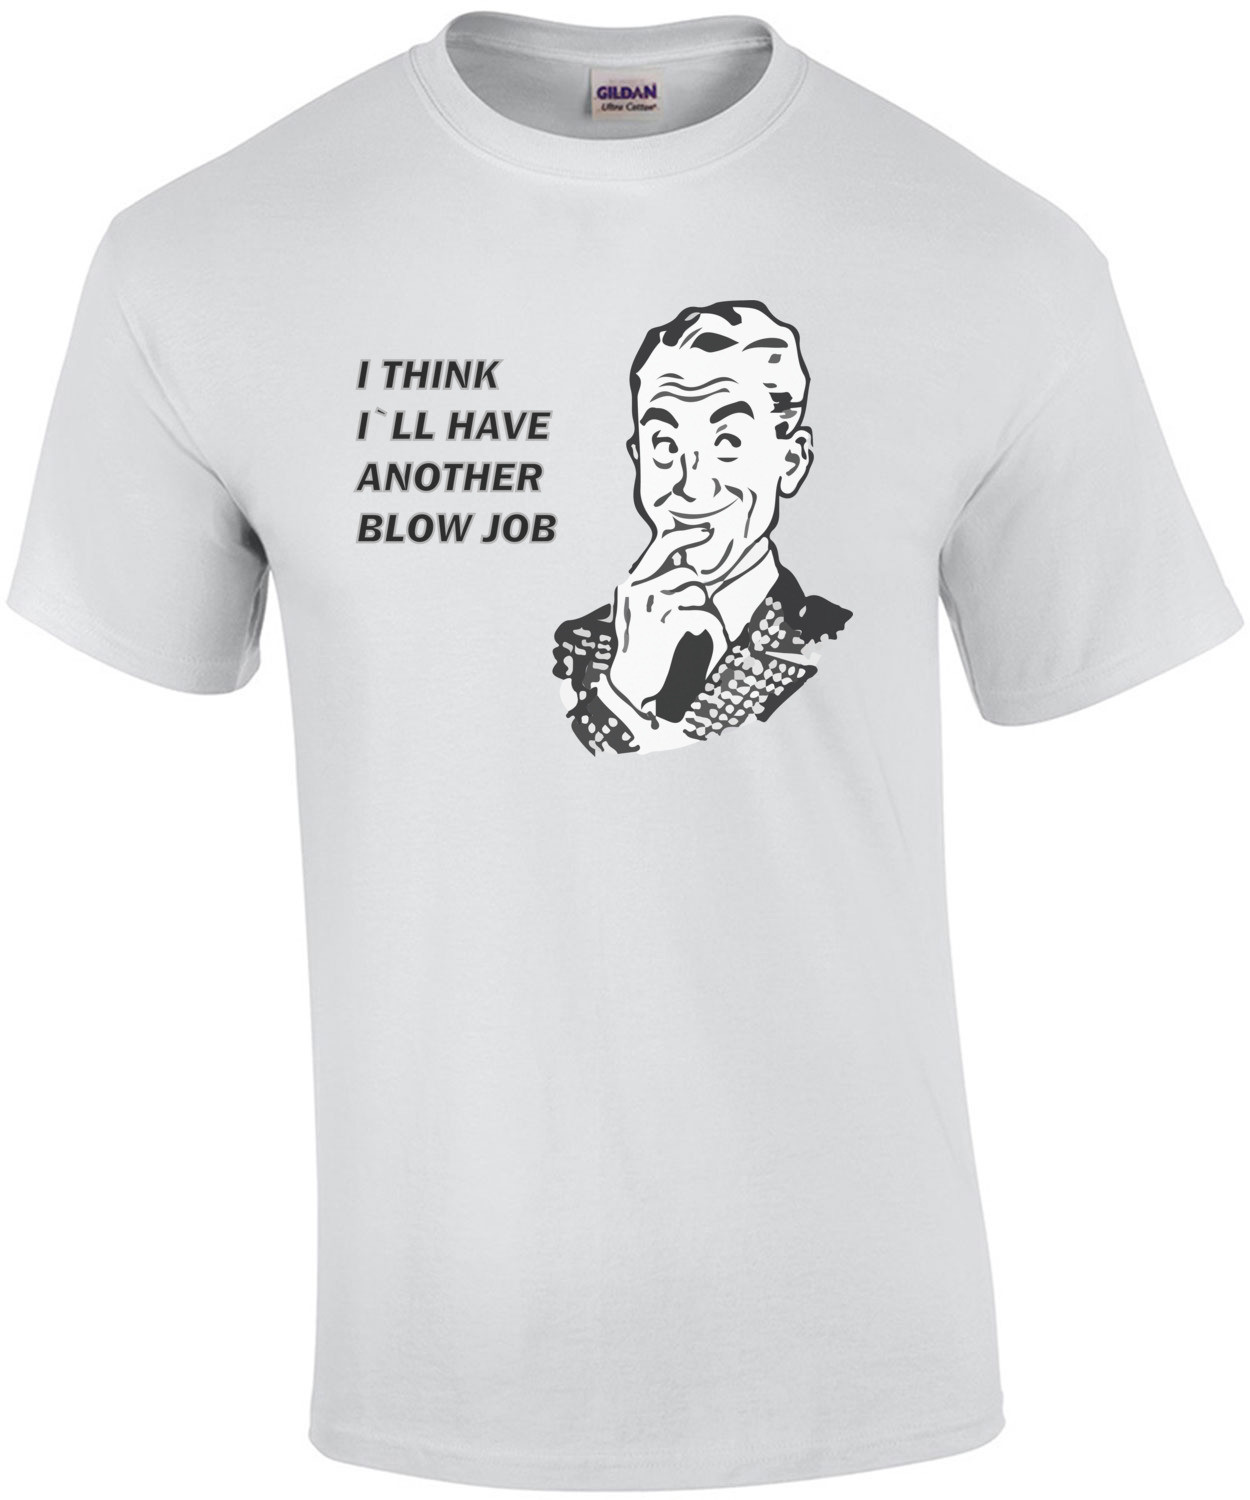 I think I'll have another blowjob T-Shirt